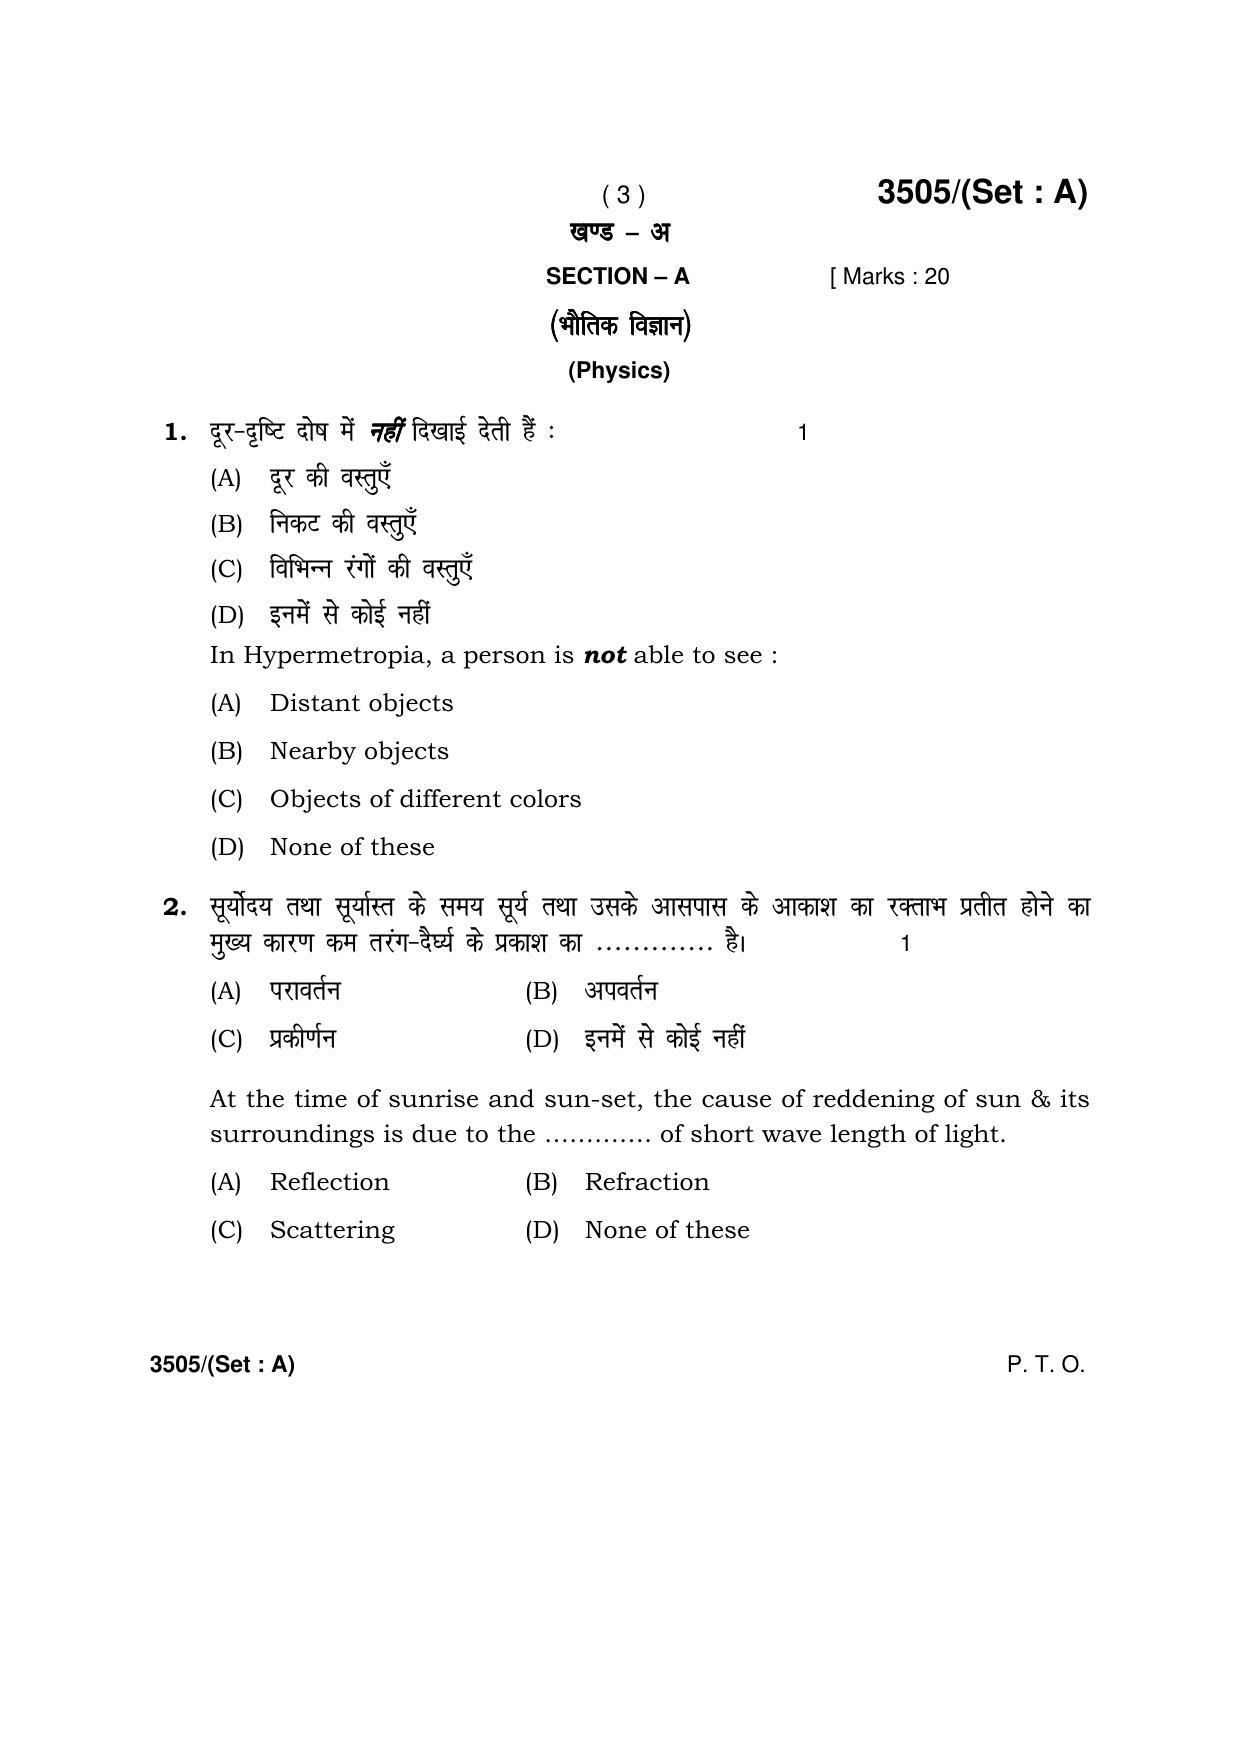 Haryana Board HBSE Class 10 Science -A 2018 Question Paper - Page 3